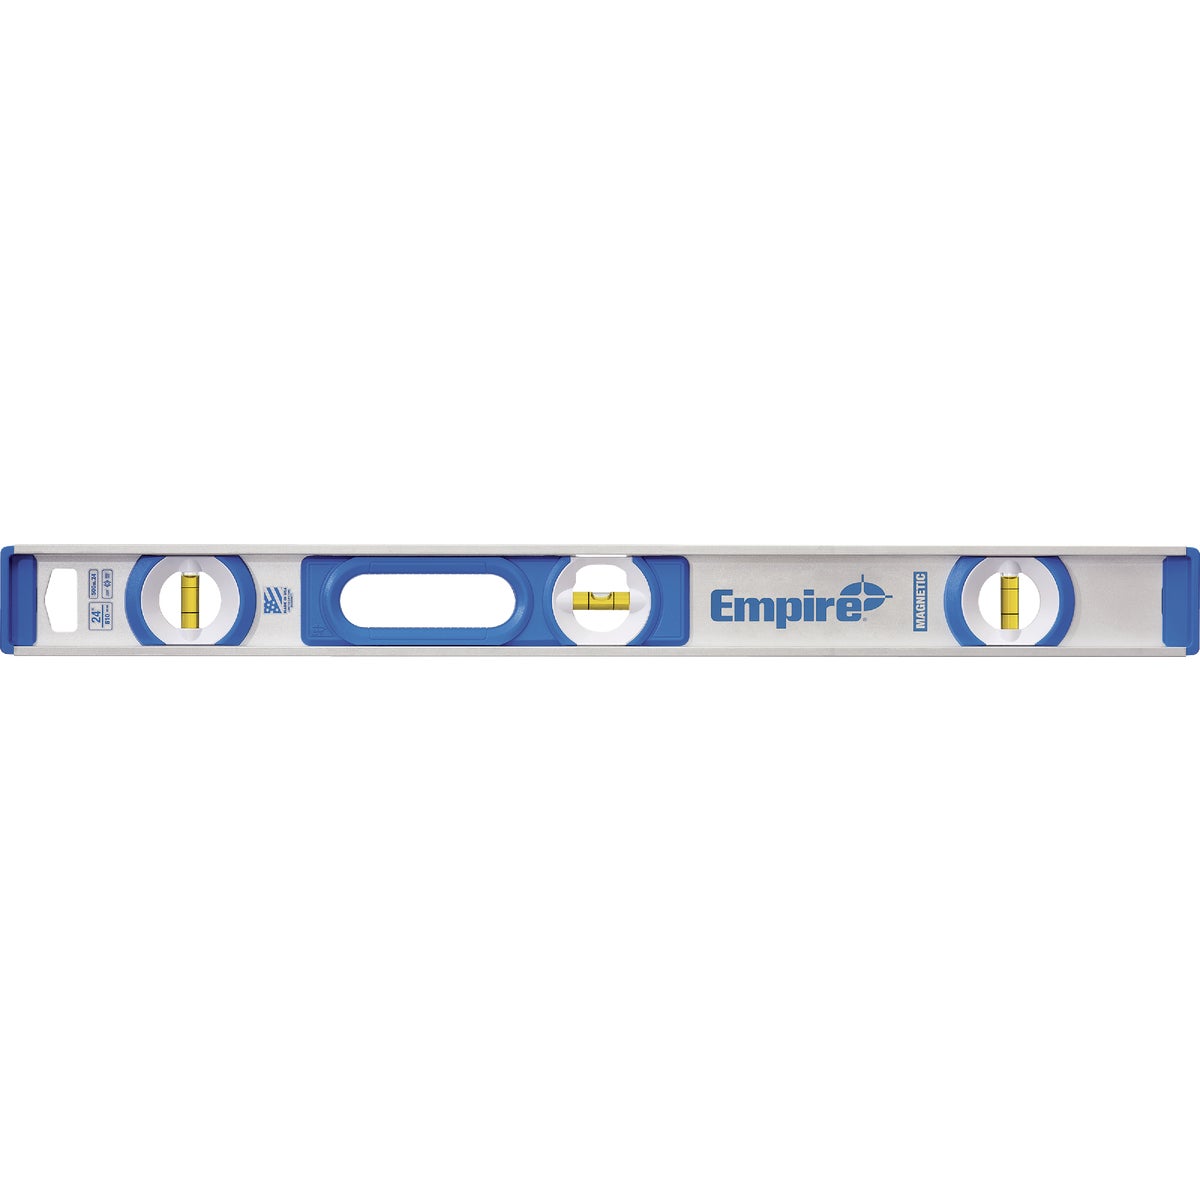 Item 303243, True Blue I-Beam level offers superior performance in all key areas of user